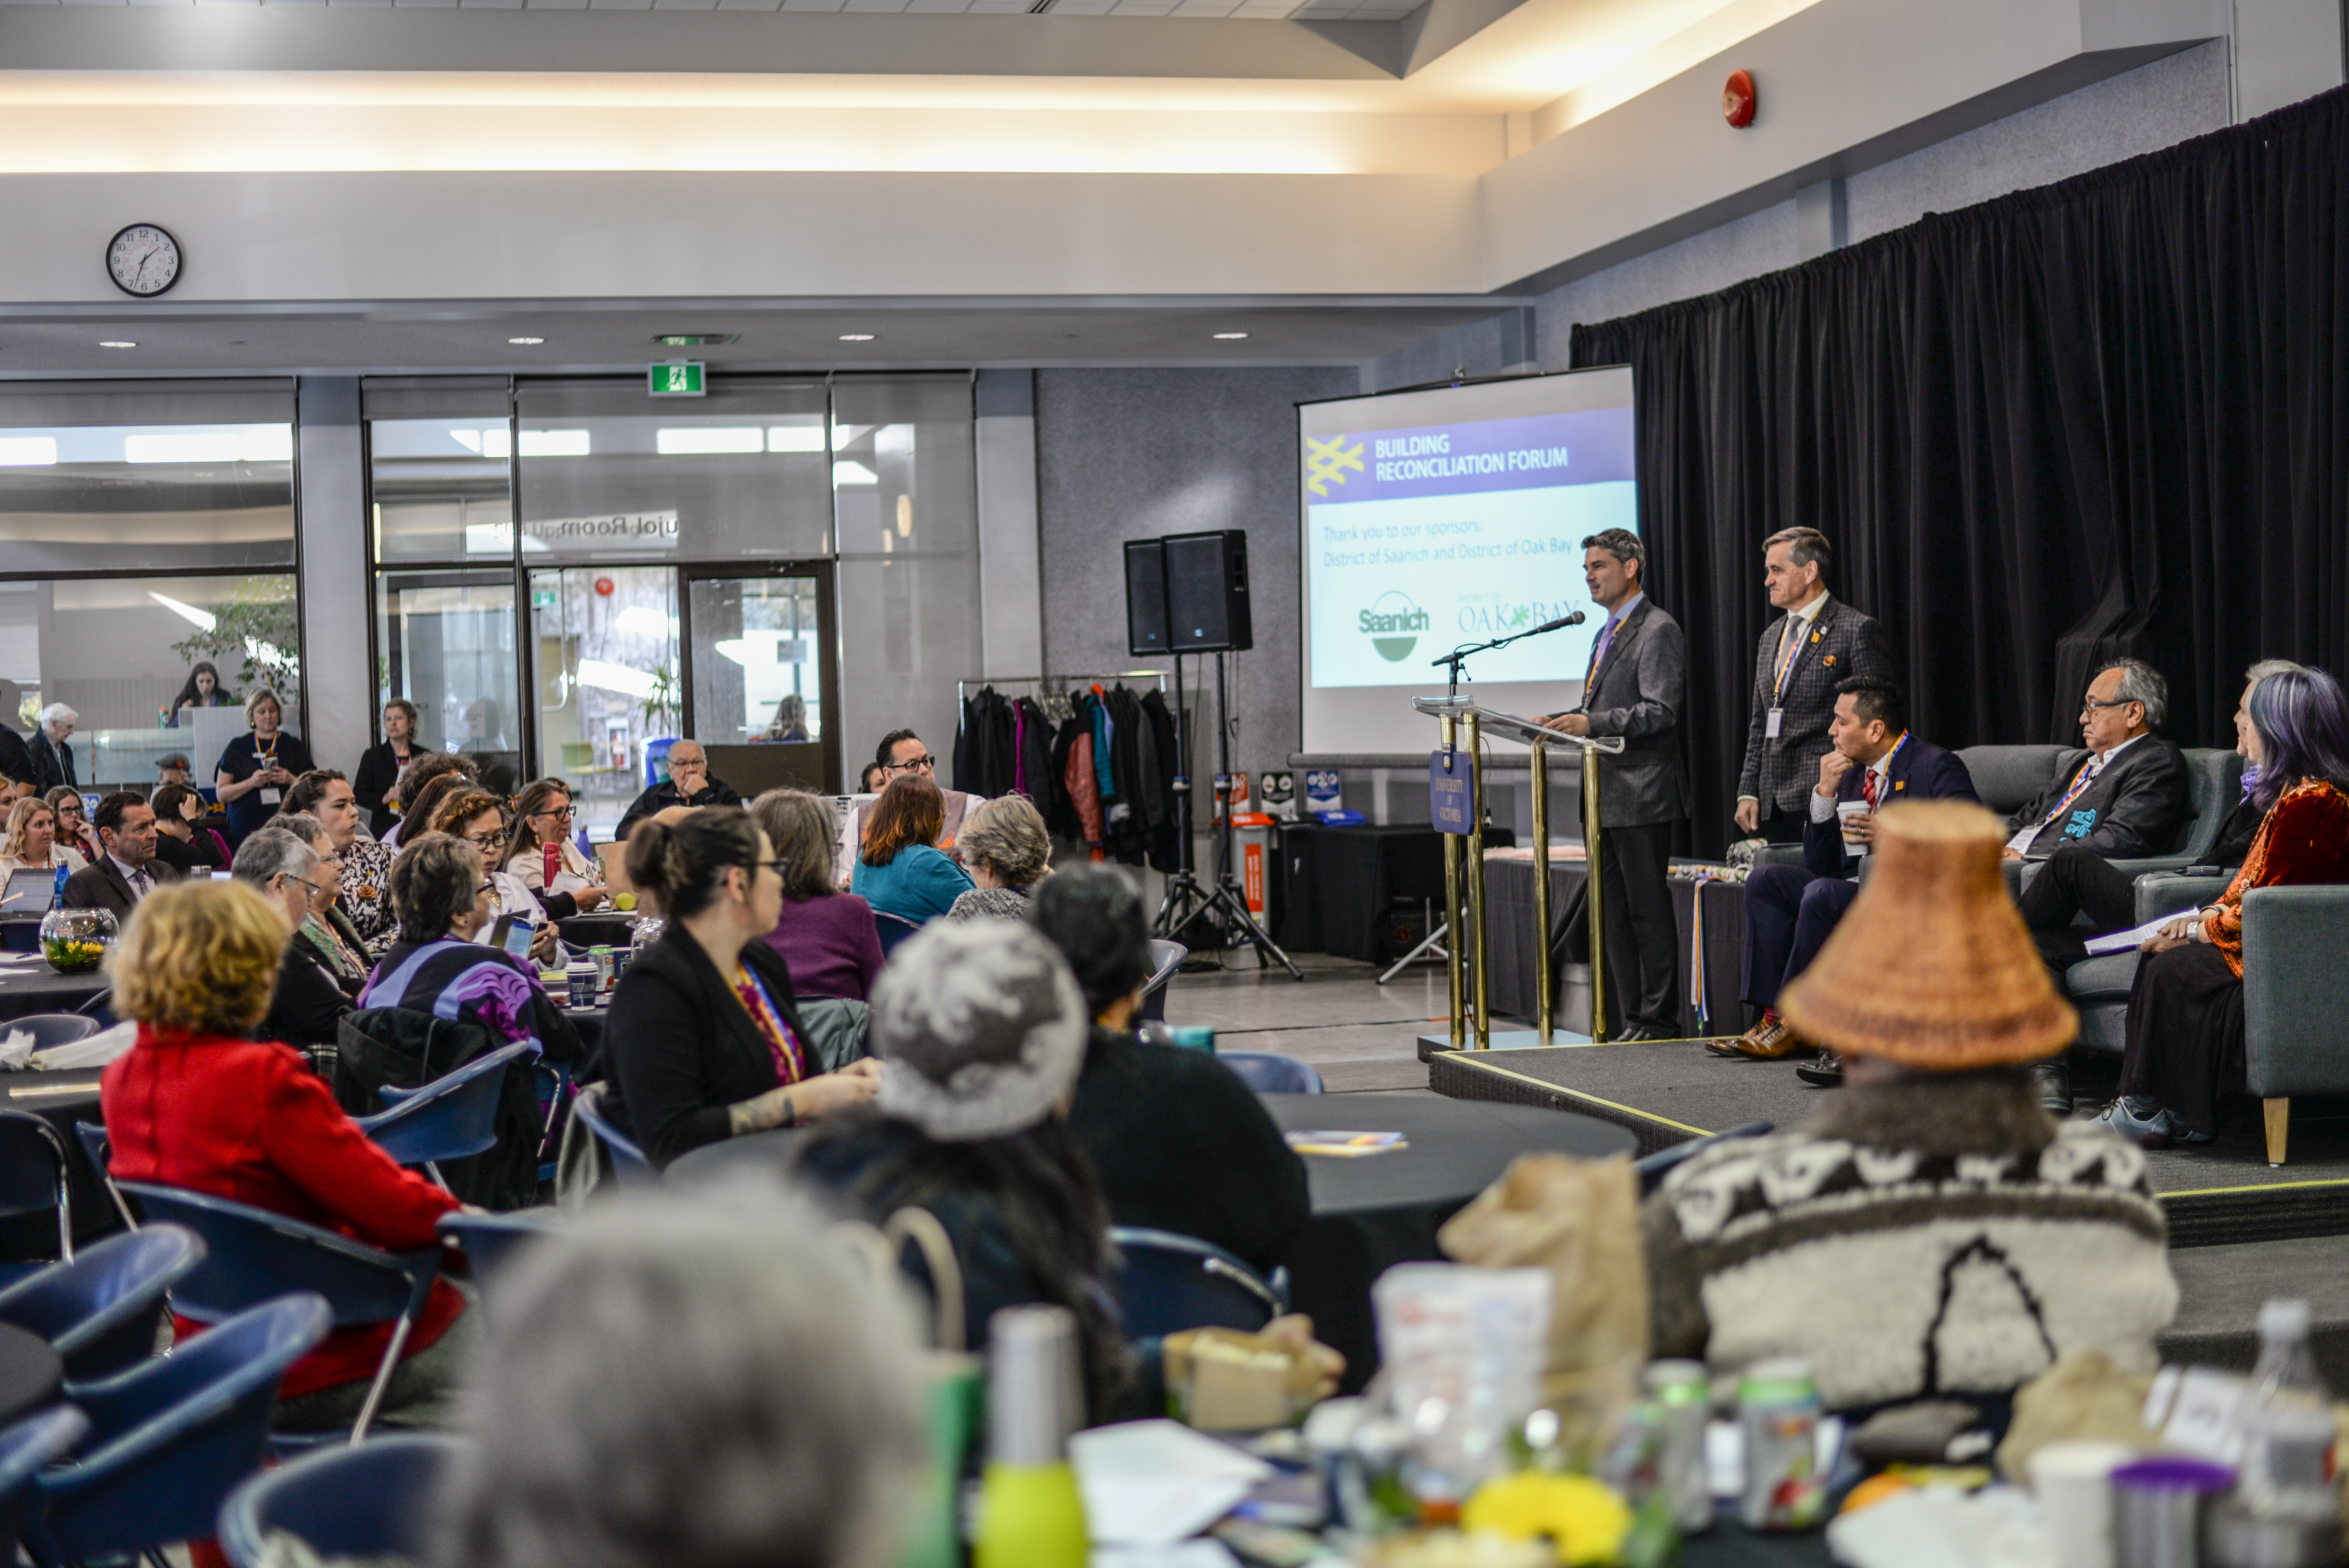 UVic hosts fourth annual Building Reconciliation Forum